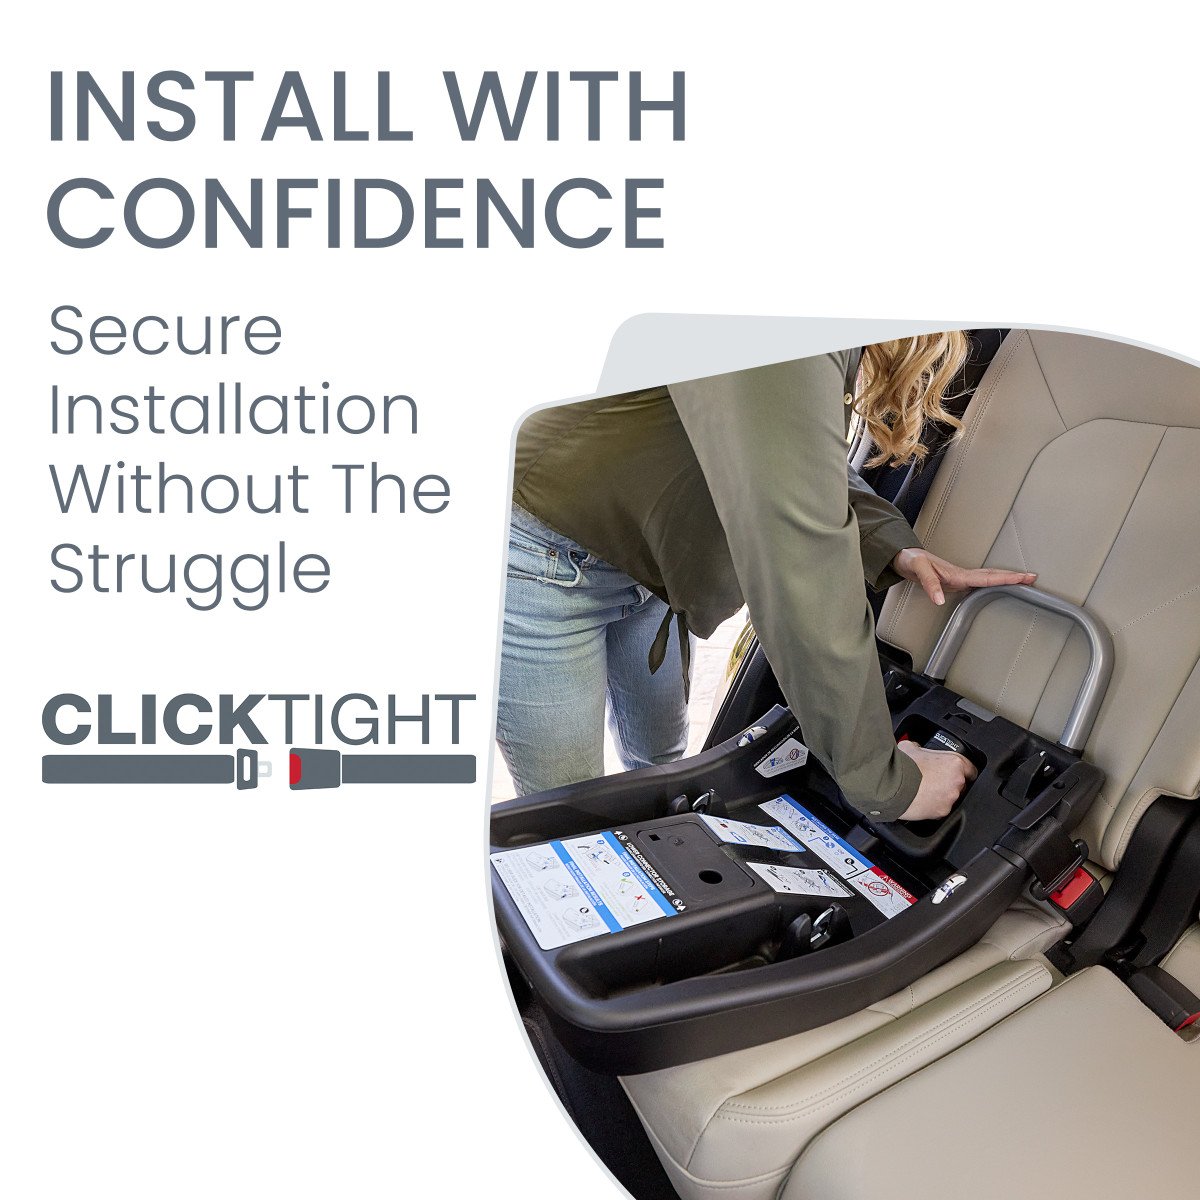 Mother Installing Infant Car Seat Base using ClickTight Technology